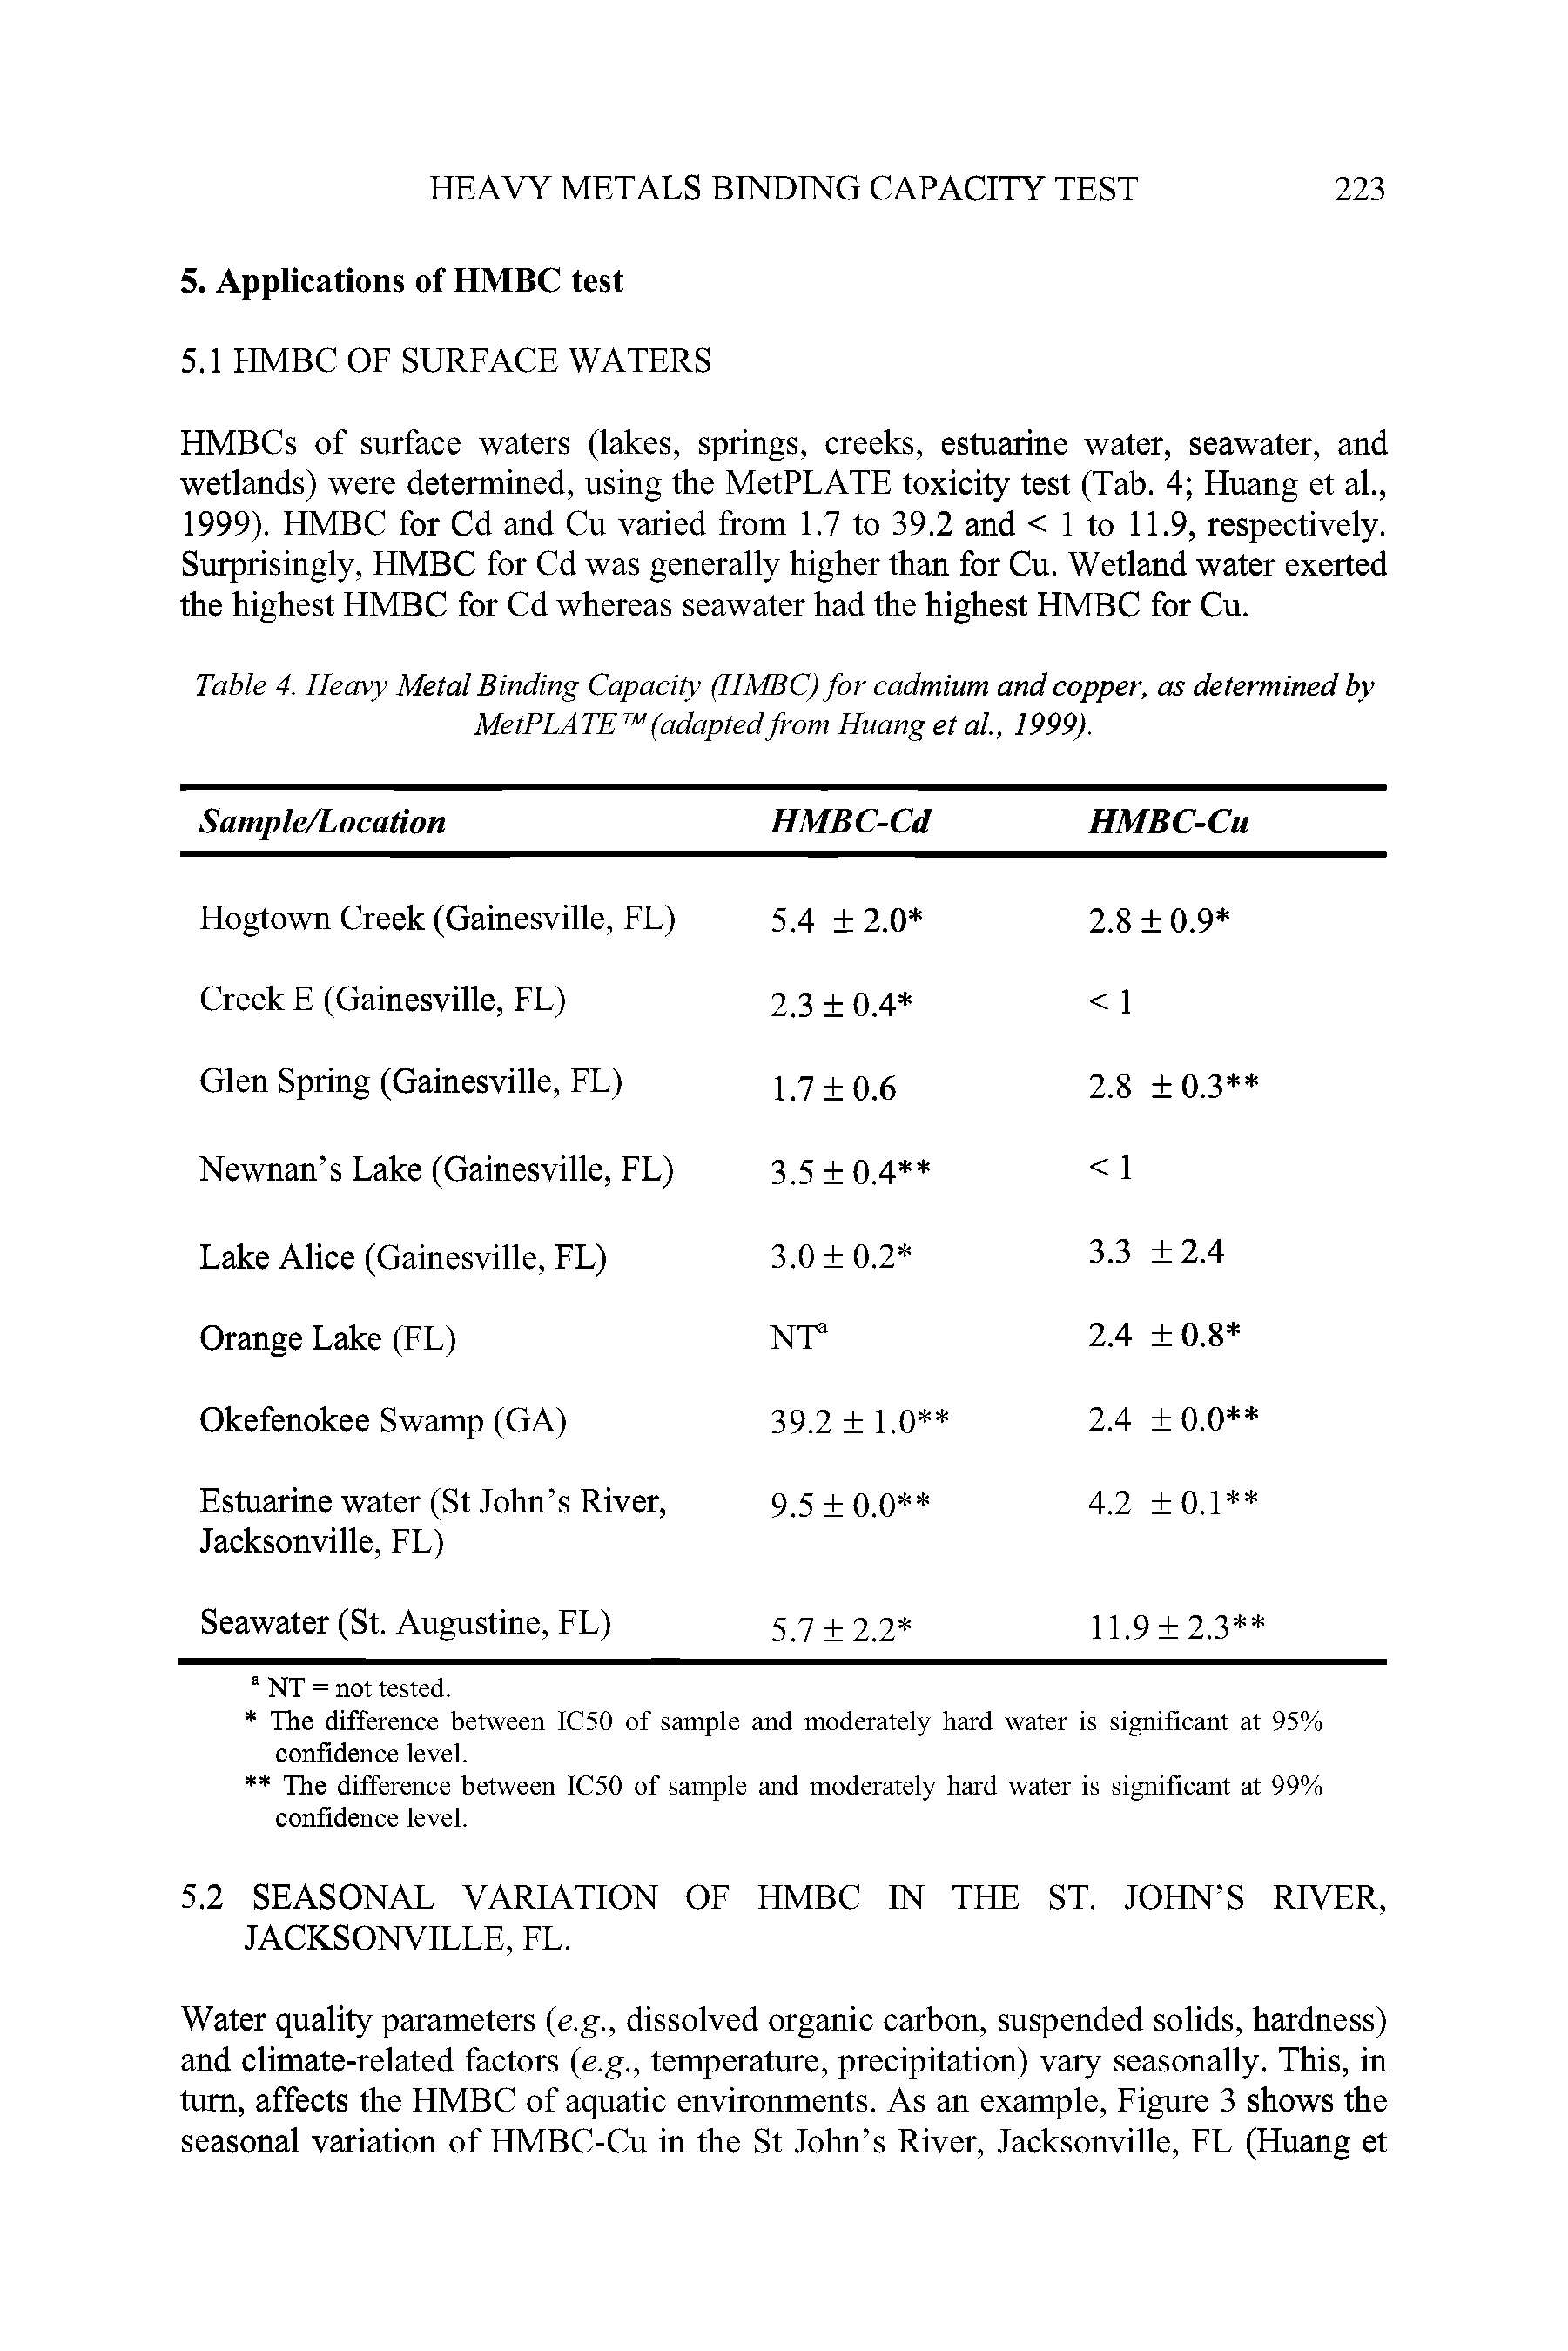 Table 4. Heavy Metal Binding Capacity (HMBC) for cadmium and copper, as determined by MetPLATE (adaptedfrom Huang et al., 1999).